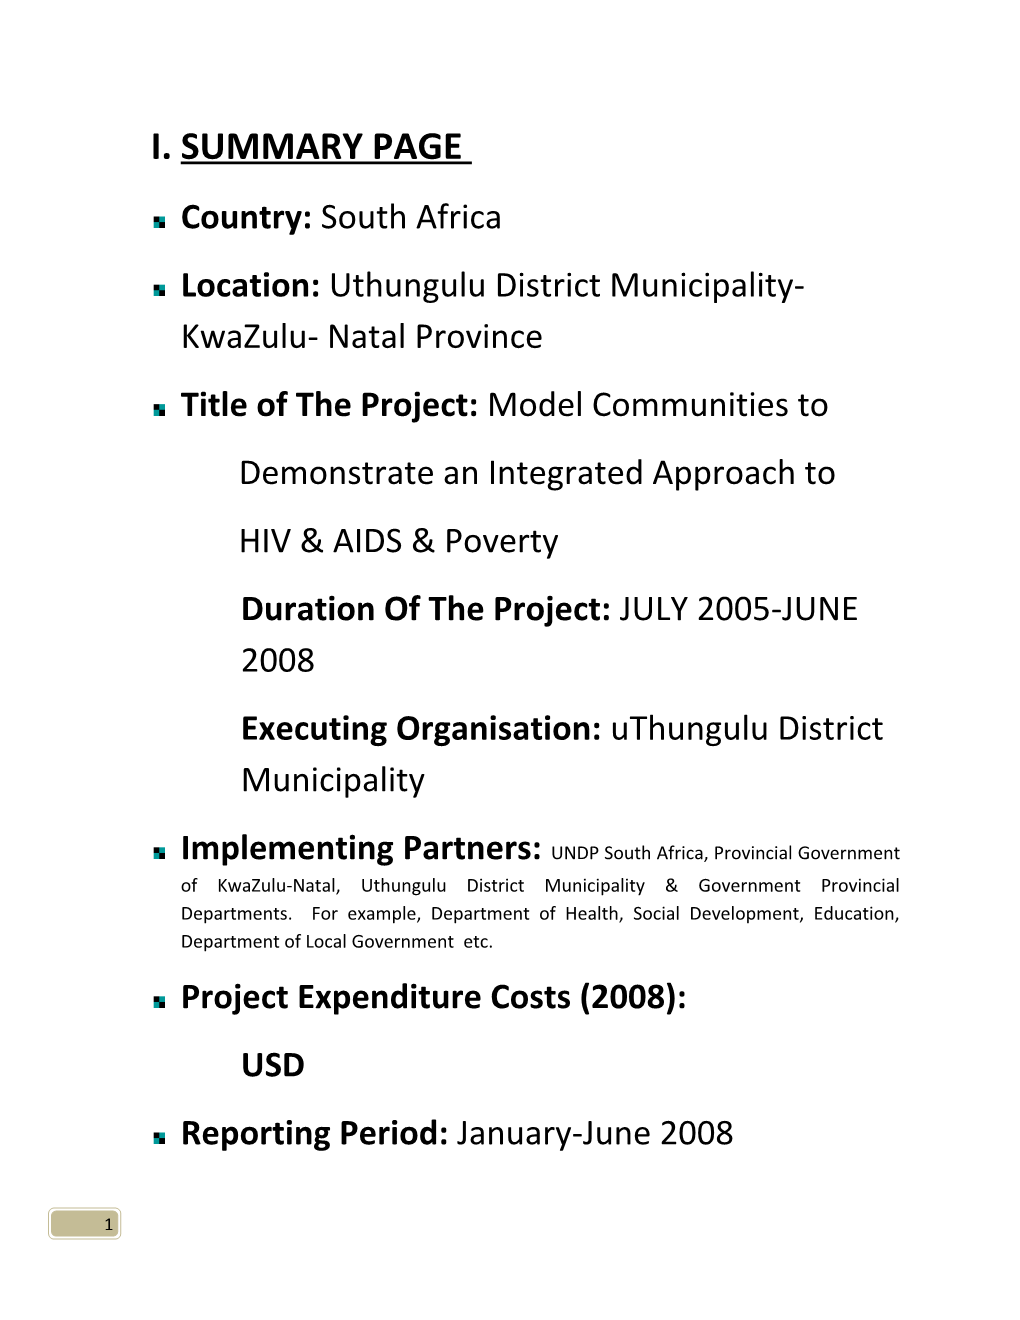 Model Communities to Demonstrate an Integrated Approach to HIV & AIDS & Poverty in Kwazulu-Natal